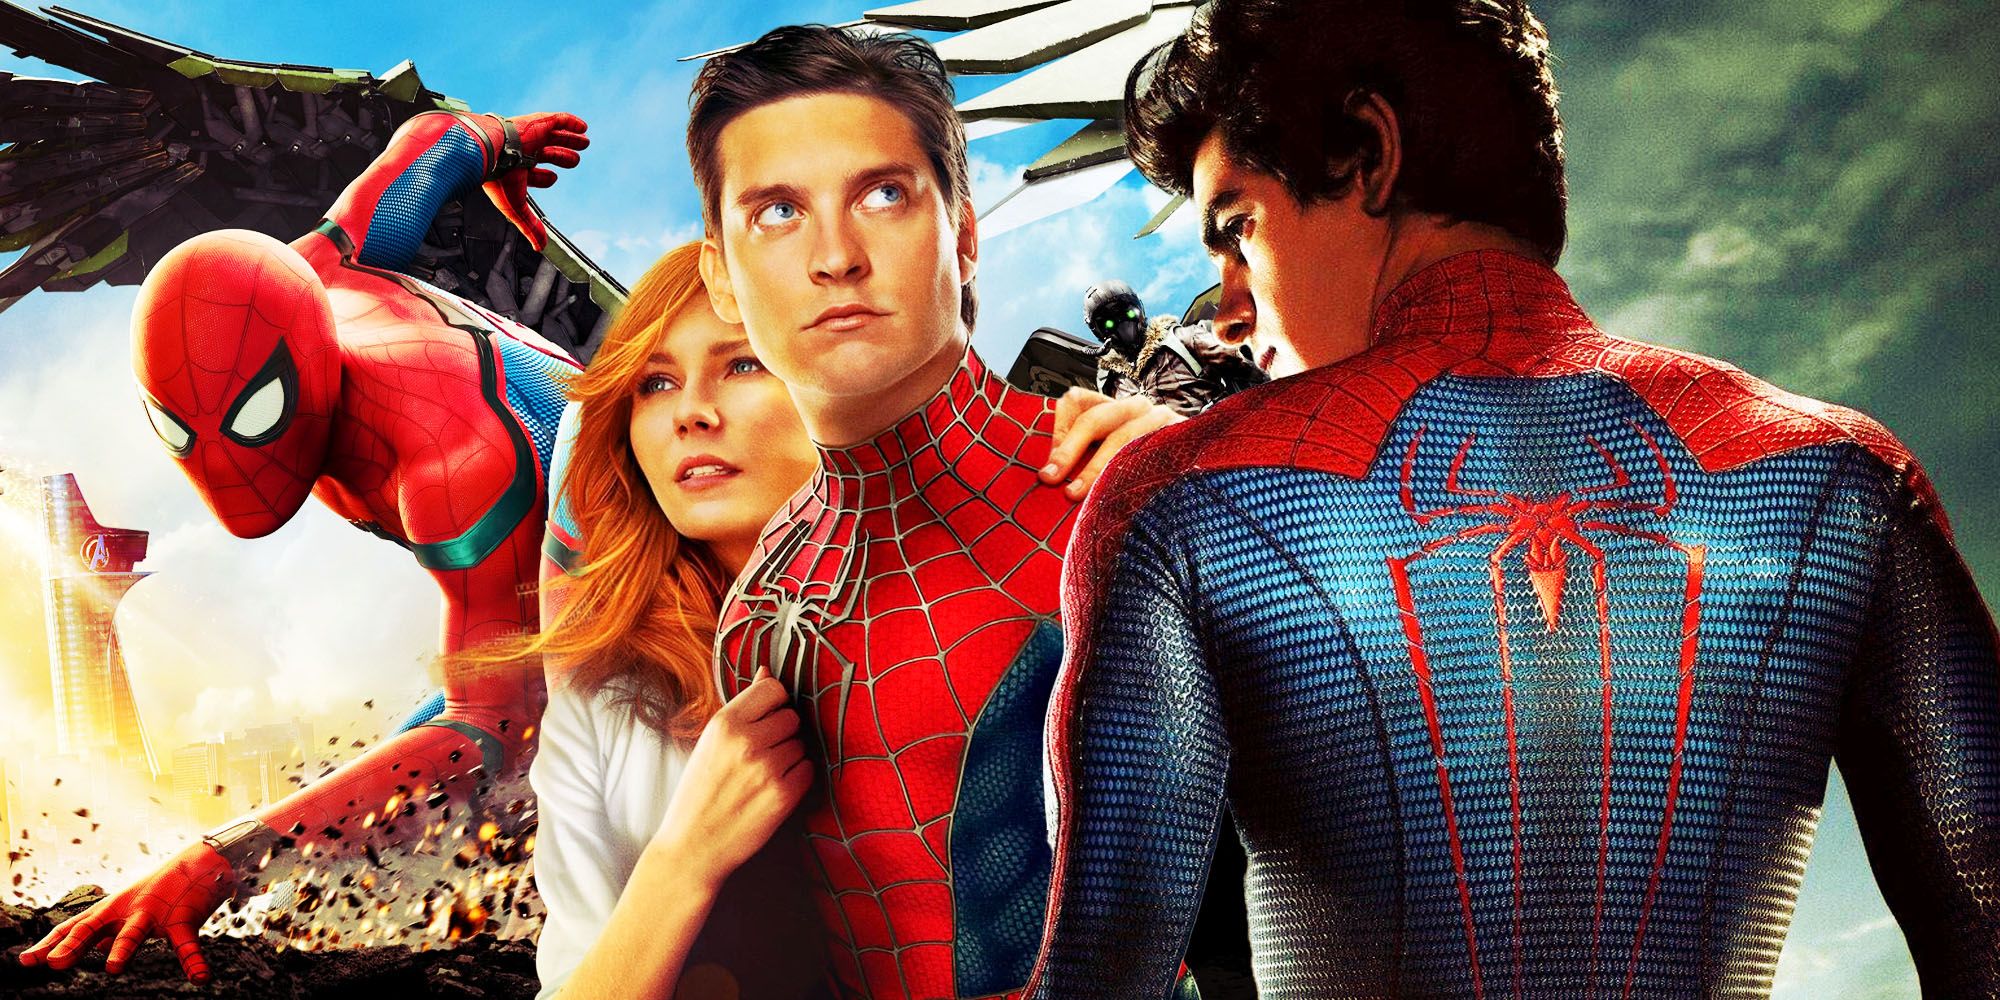 Image of Tom Holland's Spider-Man leaning forward, Tobey Maguire's Spider-Man with Kirsten Dunst's MJ, and back of Andrew Garfield's Spider-Man suit